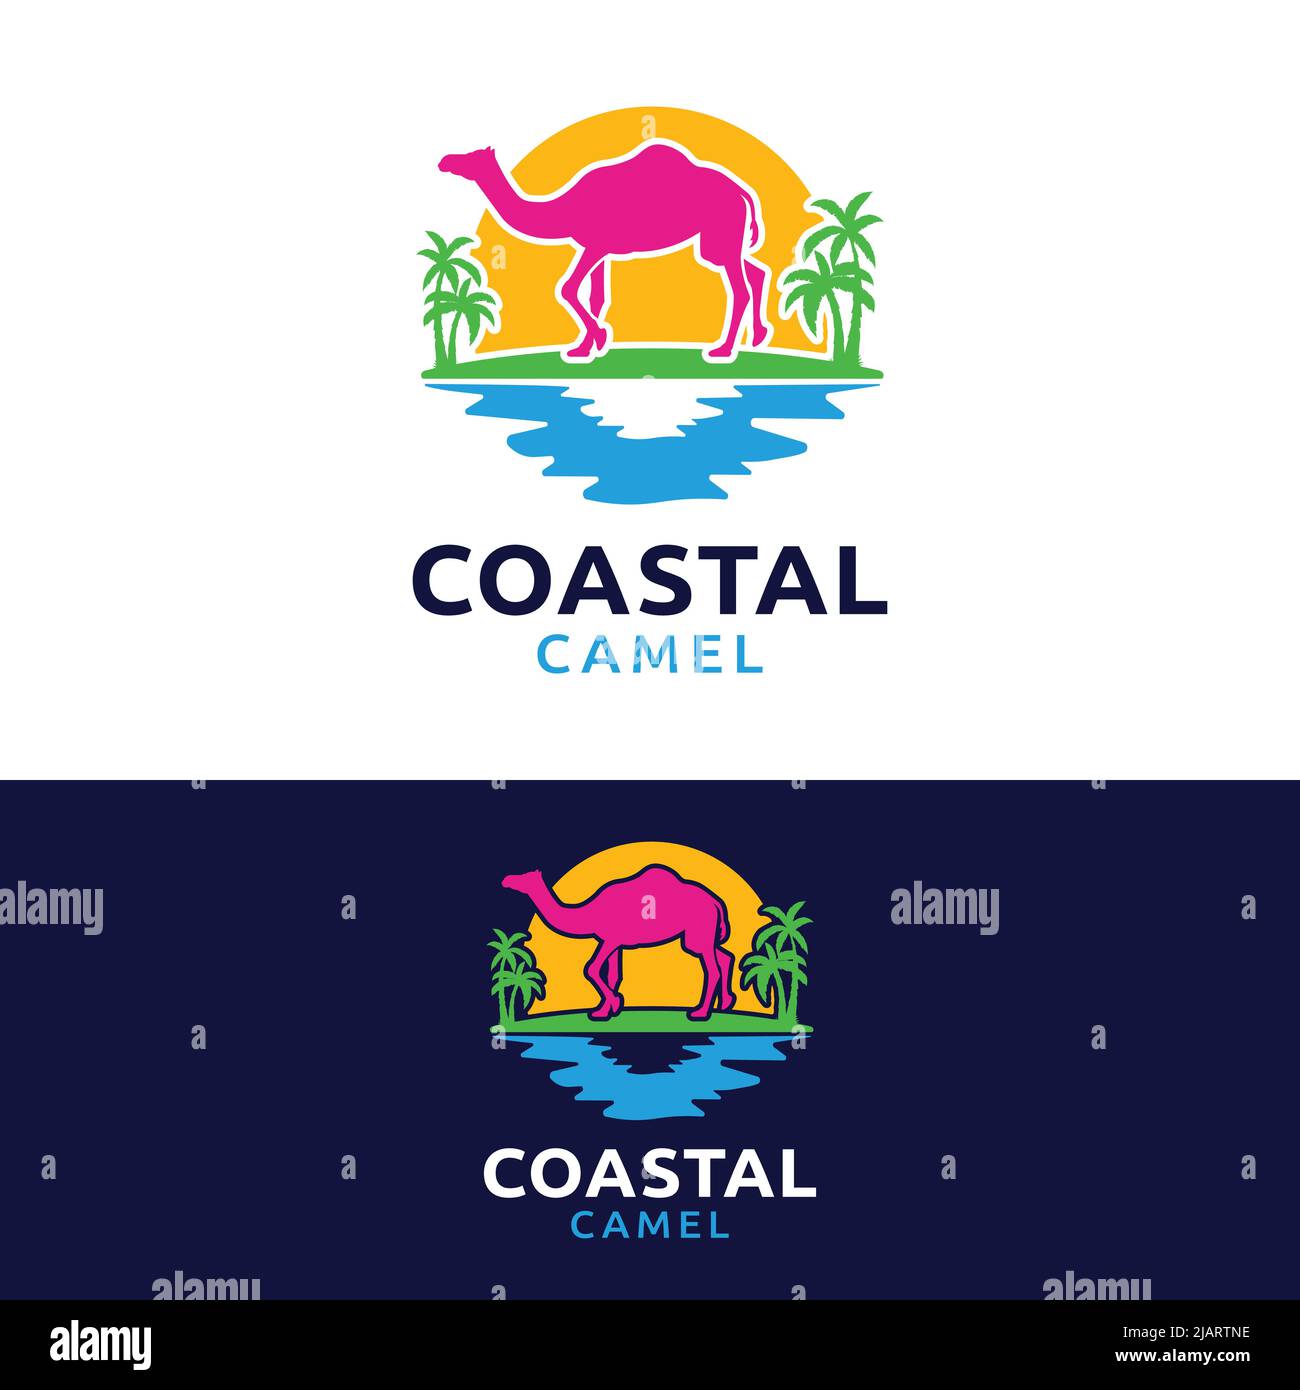 Colorful Coastal Camel Logo Design Template. a Camel Walking on The Beach with The Sun and Palm Trees. Suitable for Coastal Beach Travel Tourism Busin Stock Vector